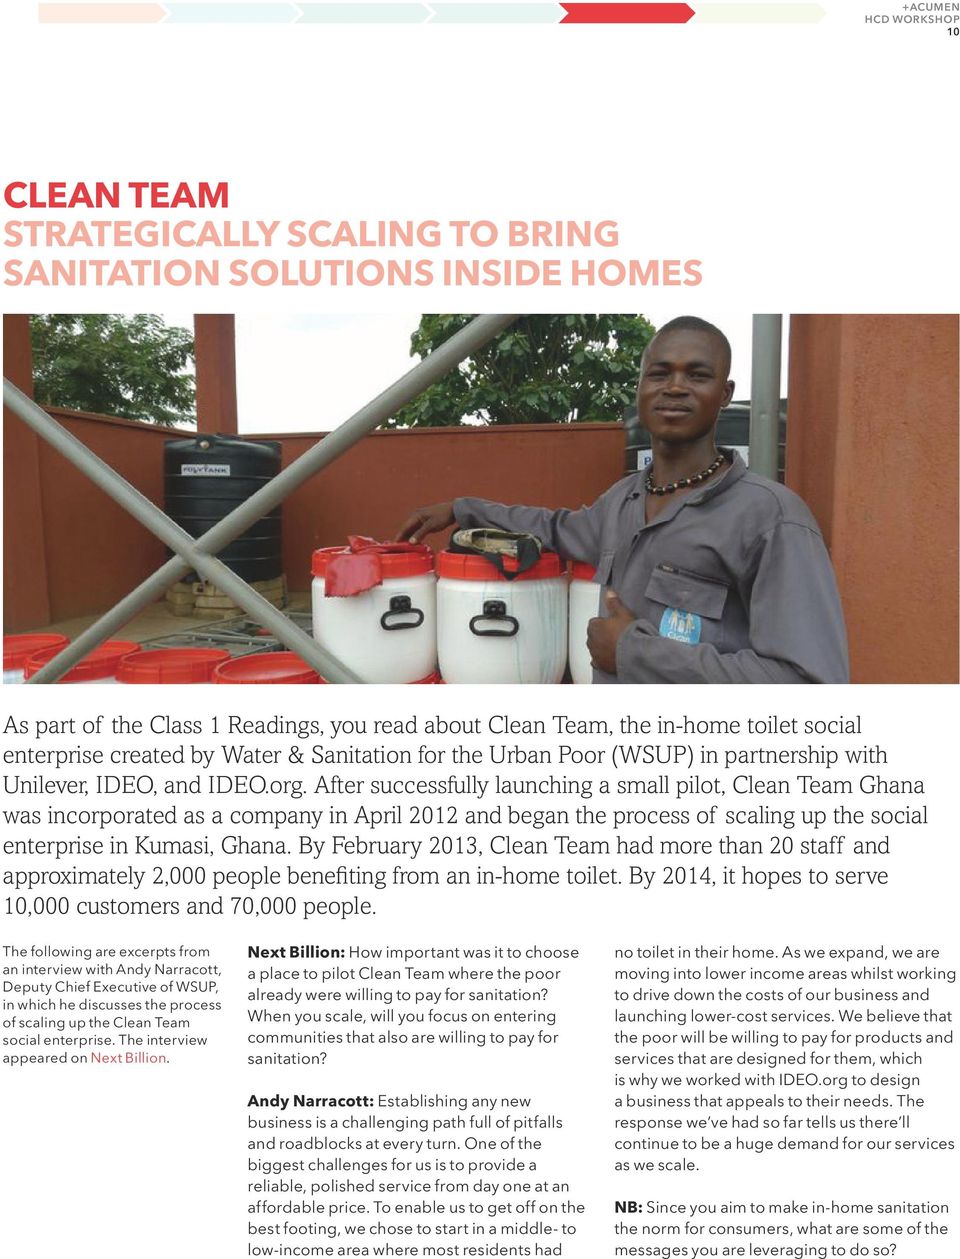 After successfully launching a small pilot, Clean Team Ghana was incorporated as a company in April 2012 and began the process of scaling up the social enterprise in Kumasi, Ghana.